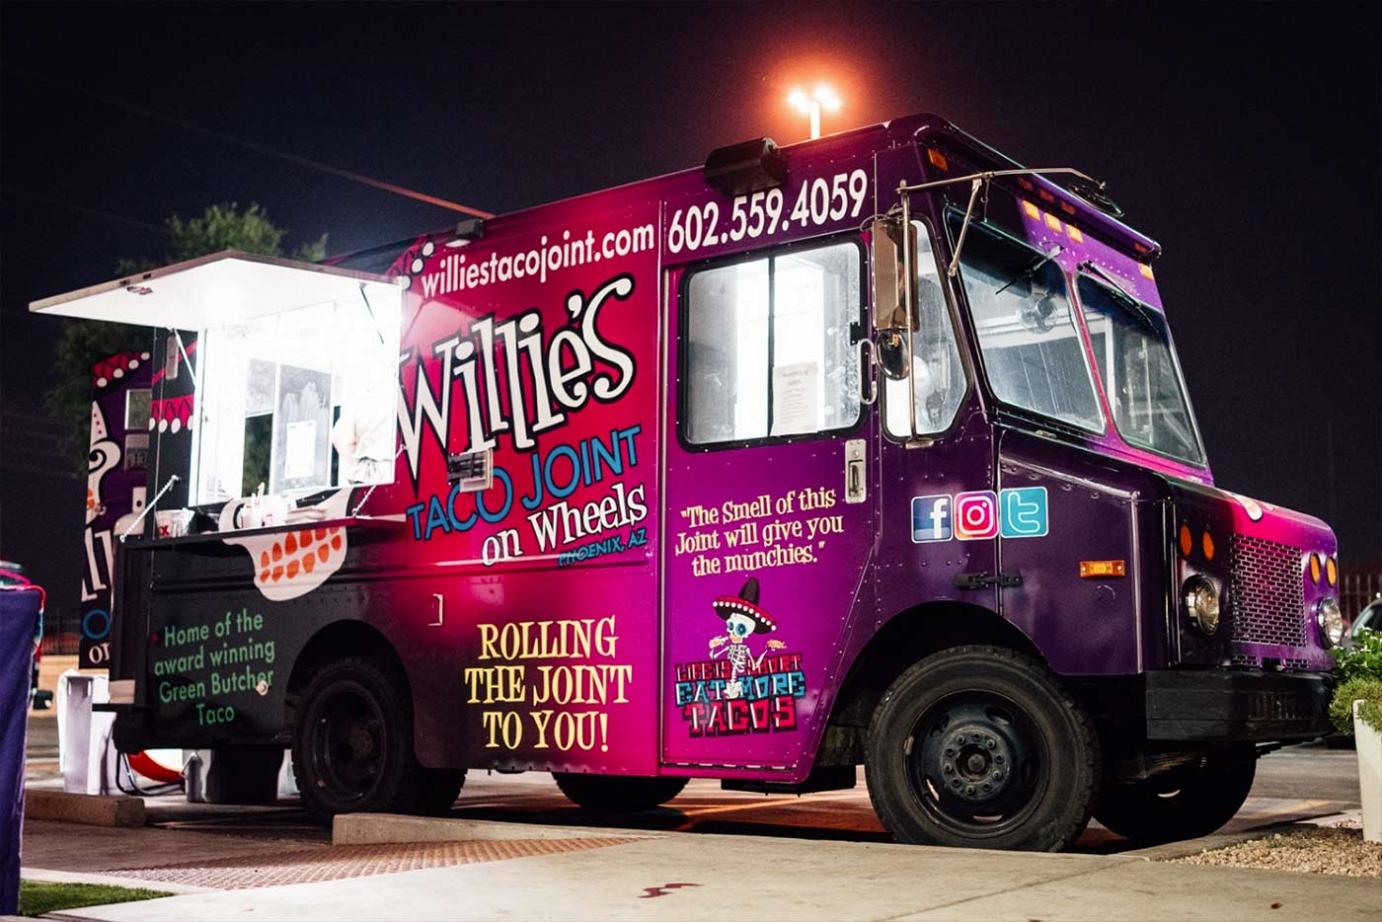 Willie's Taco Joint truck at night